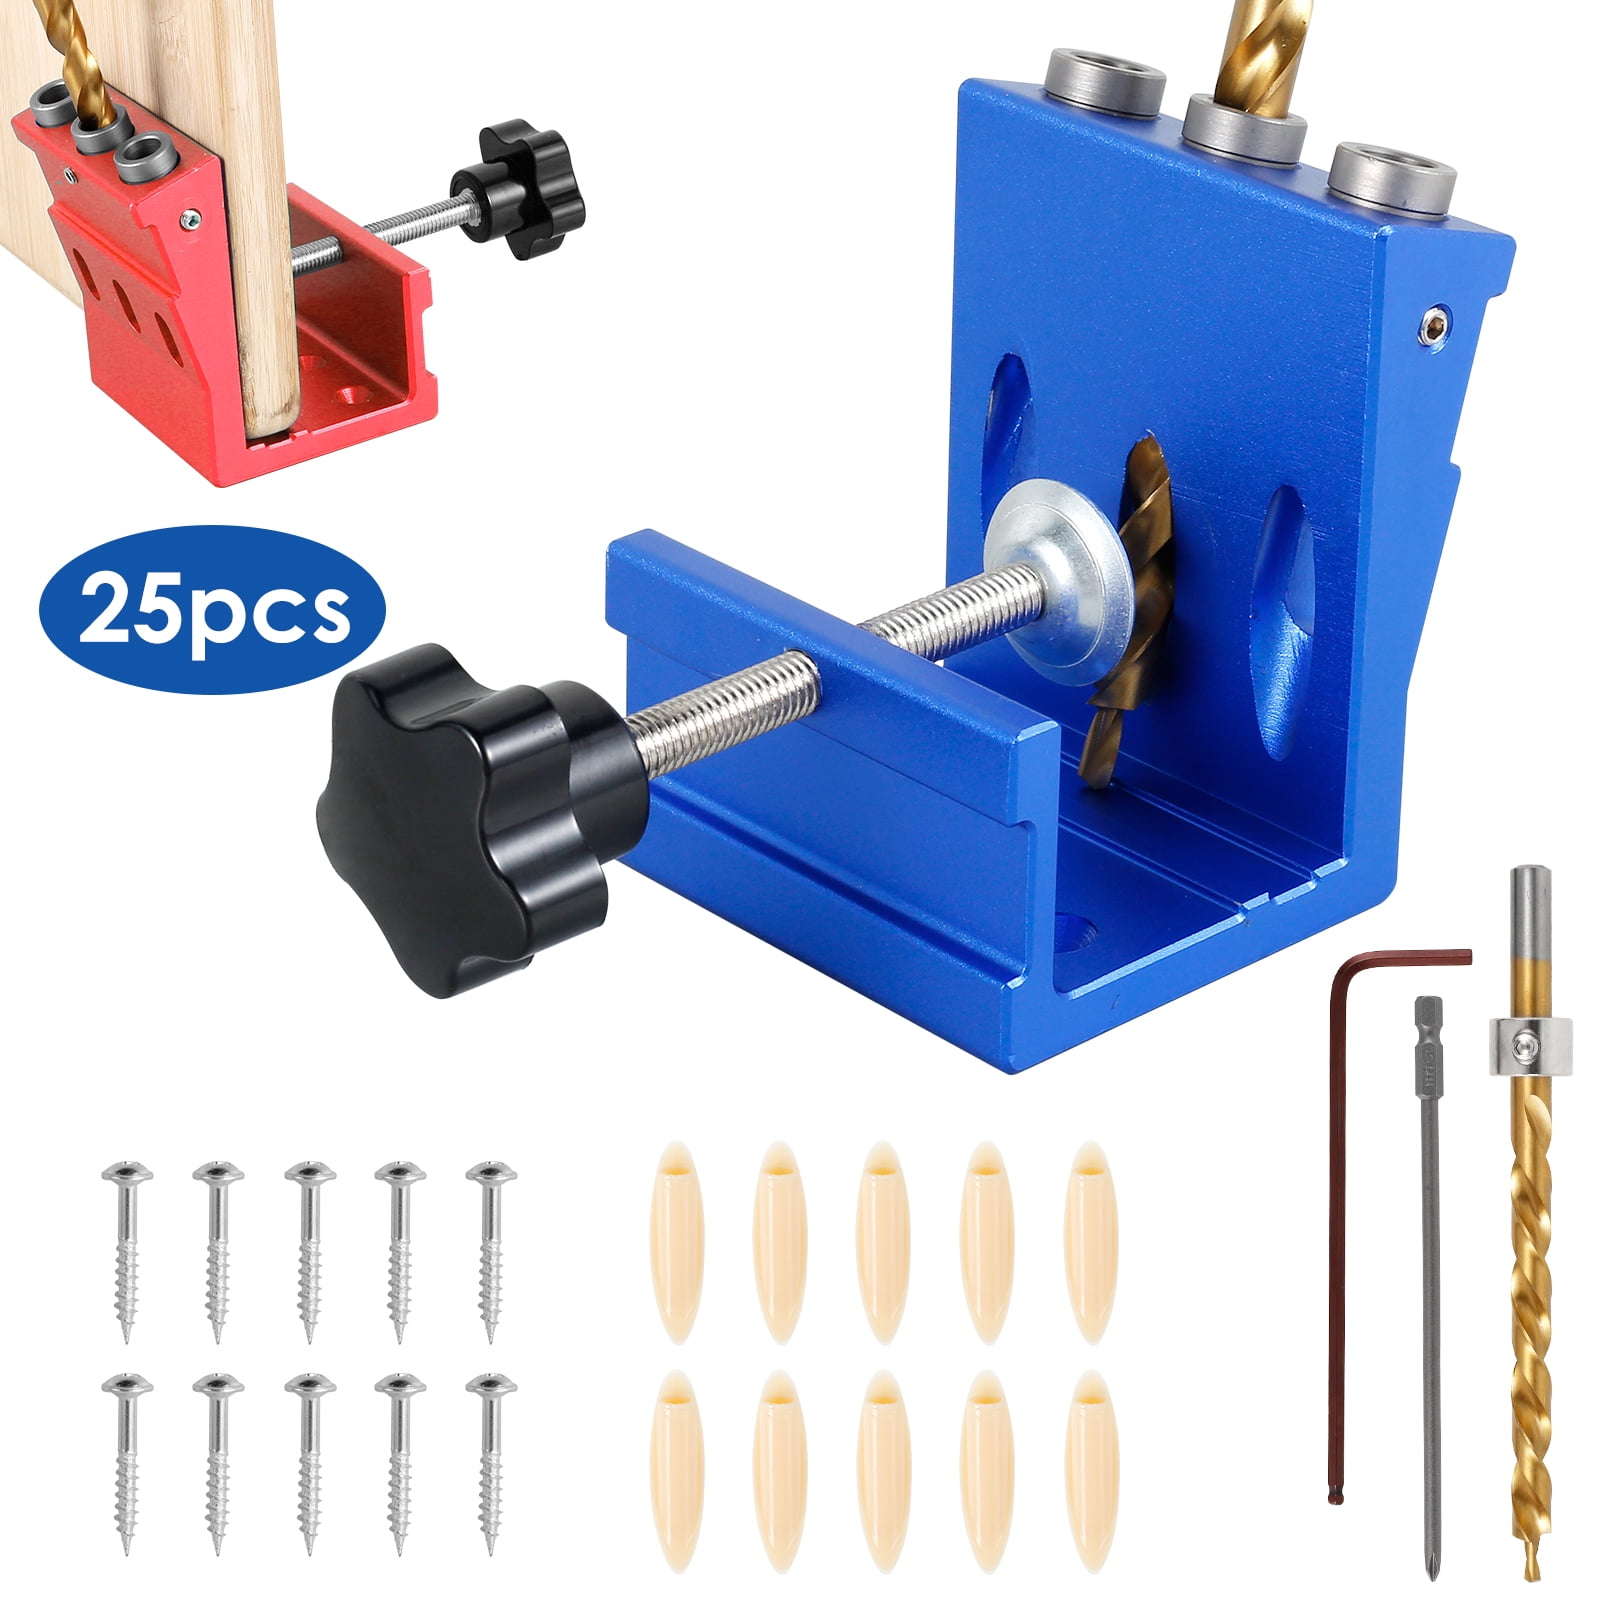 verlacod Pocket Hole Jig Kit Aluminum Alloy 3-Hole Pocket Screw Jig Drill  Guide Portable Precise Woodworking Punch Locator Tool for Wood Drilling，Red  